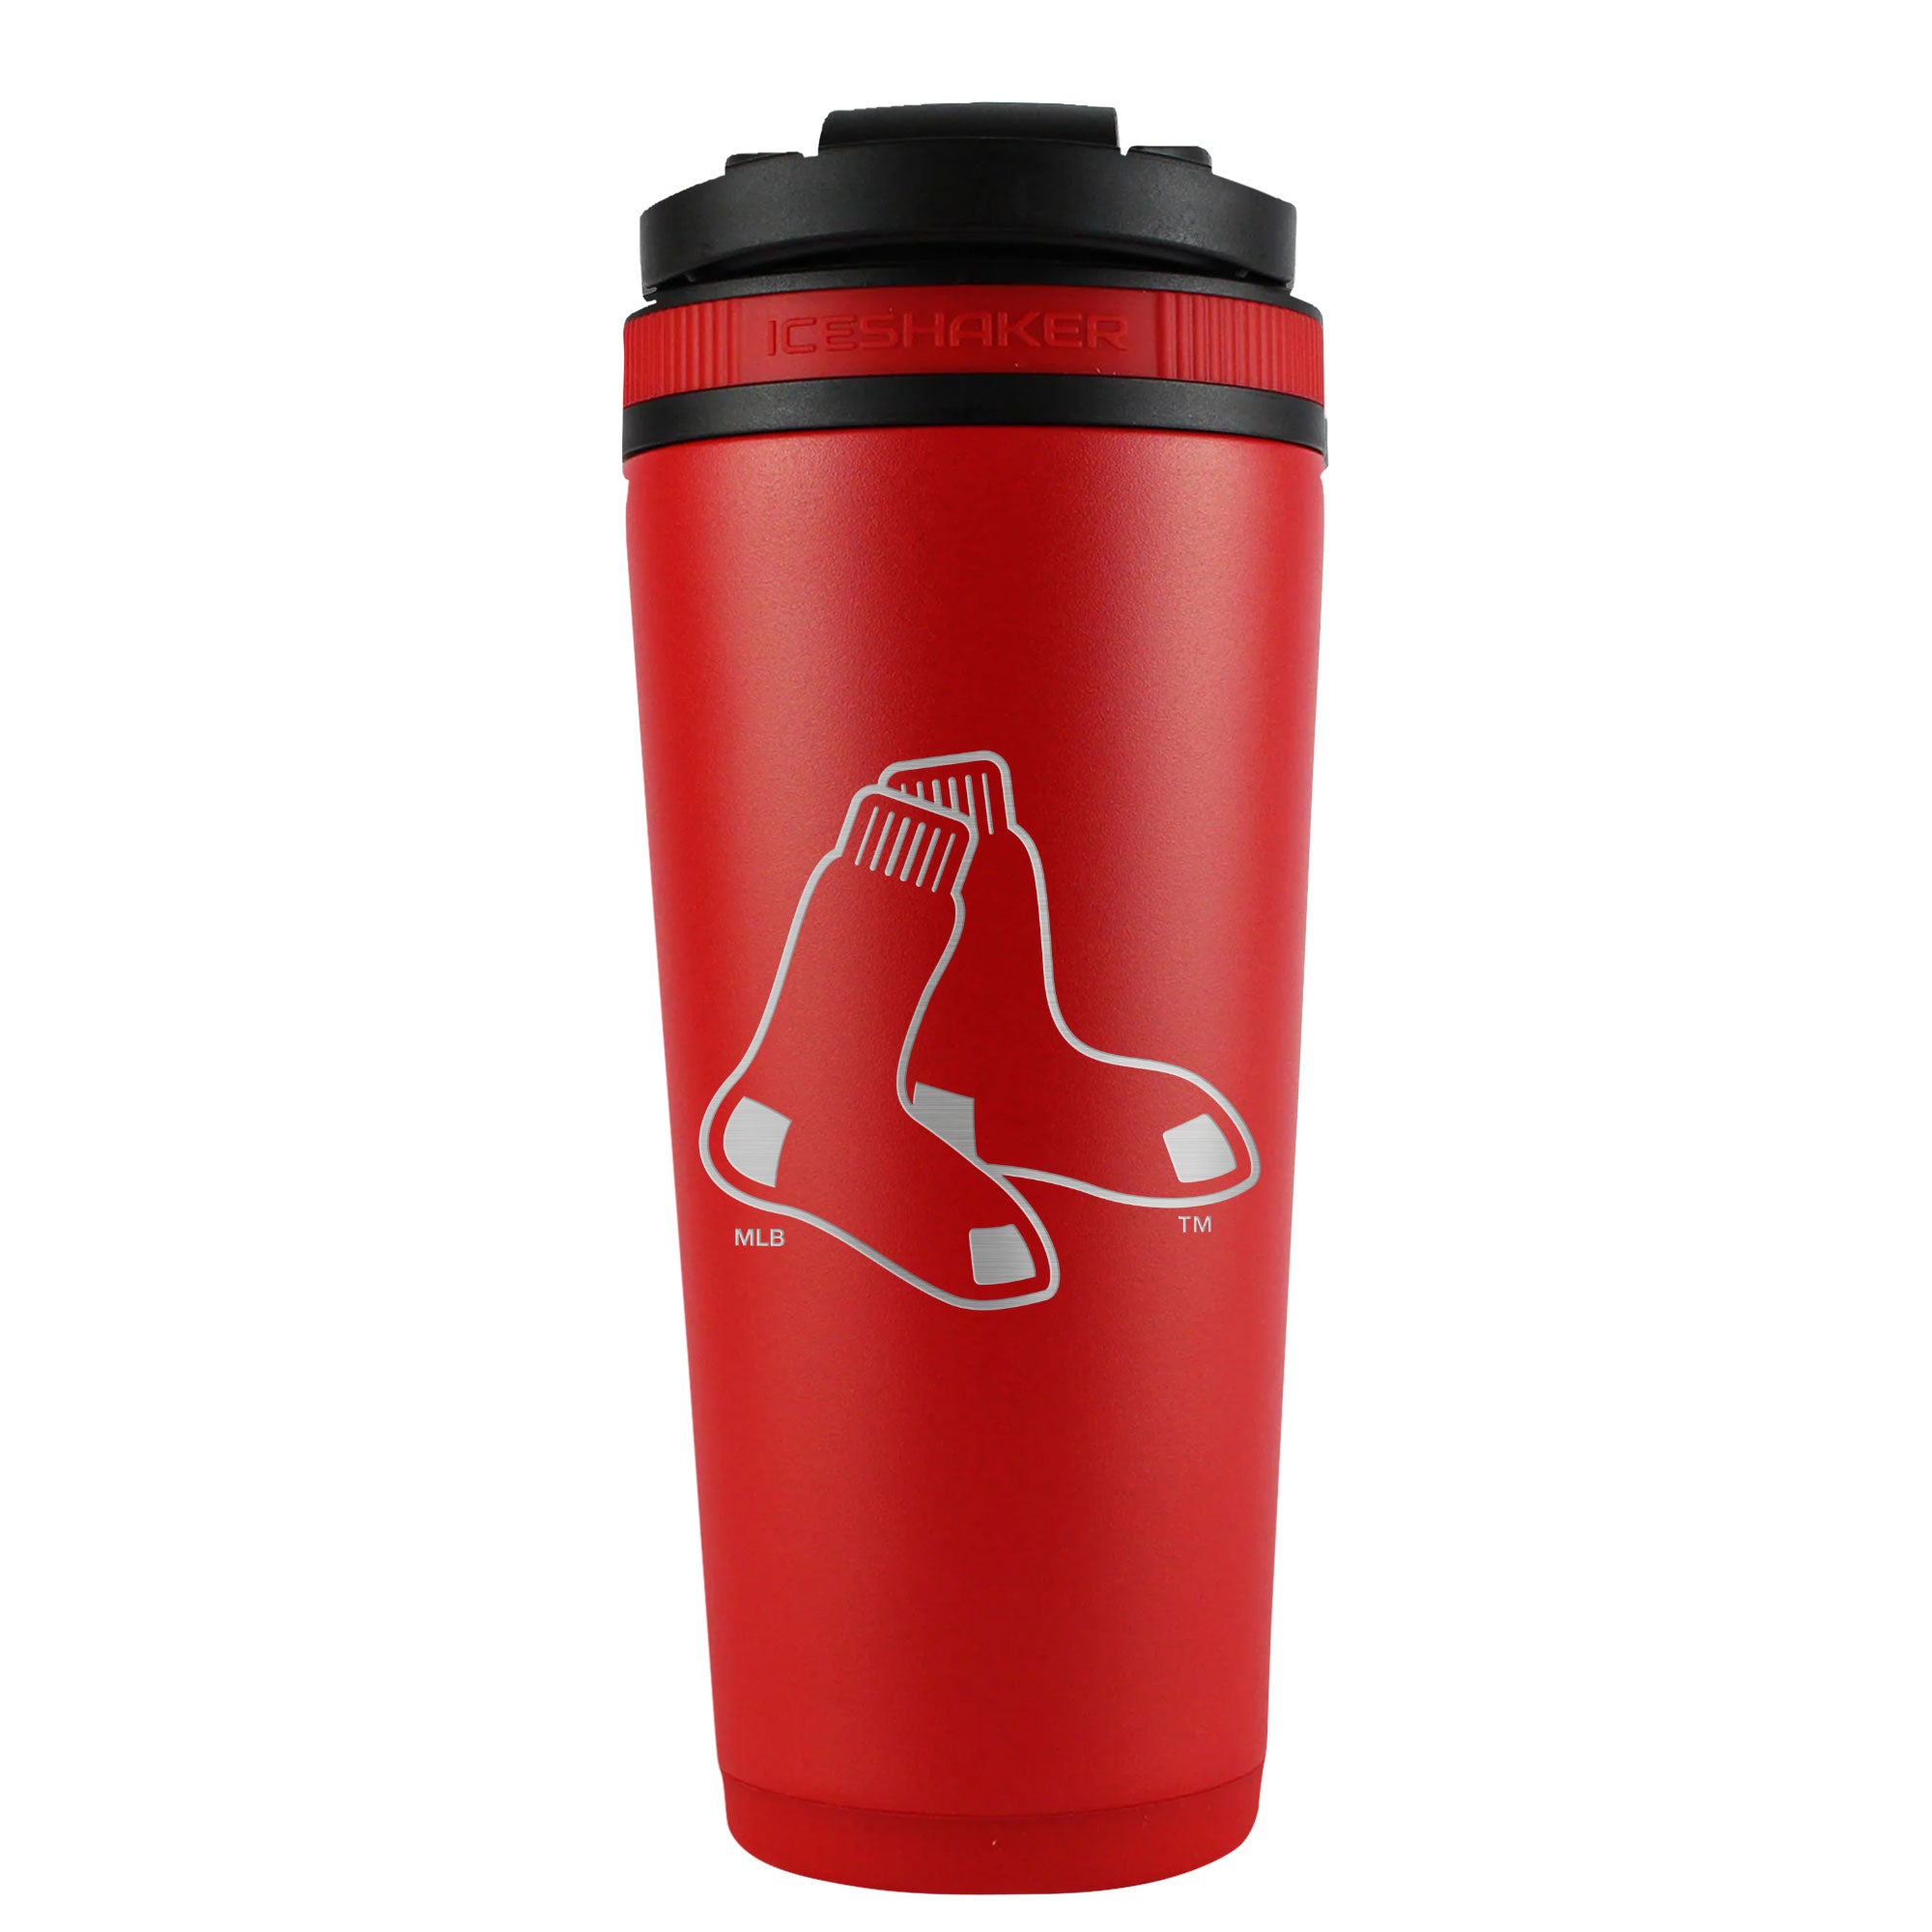 Officially Licensed MLB Boston Red Sox 26oz Ice Shaker